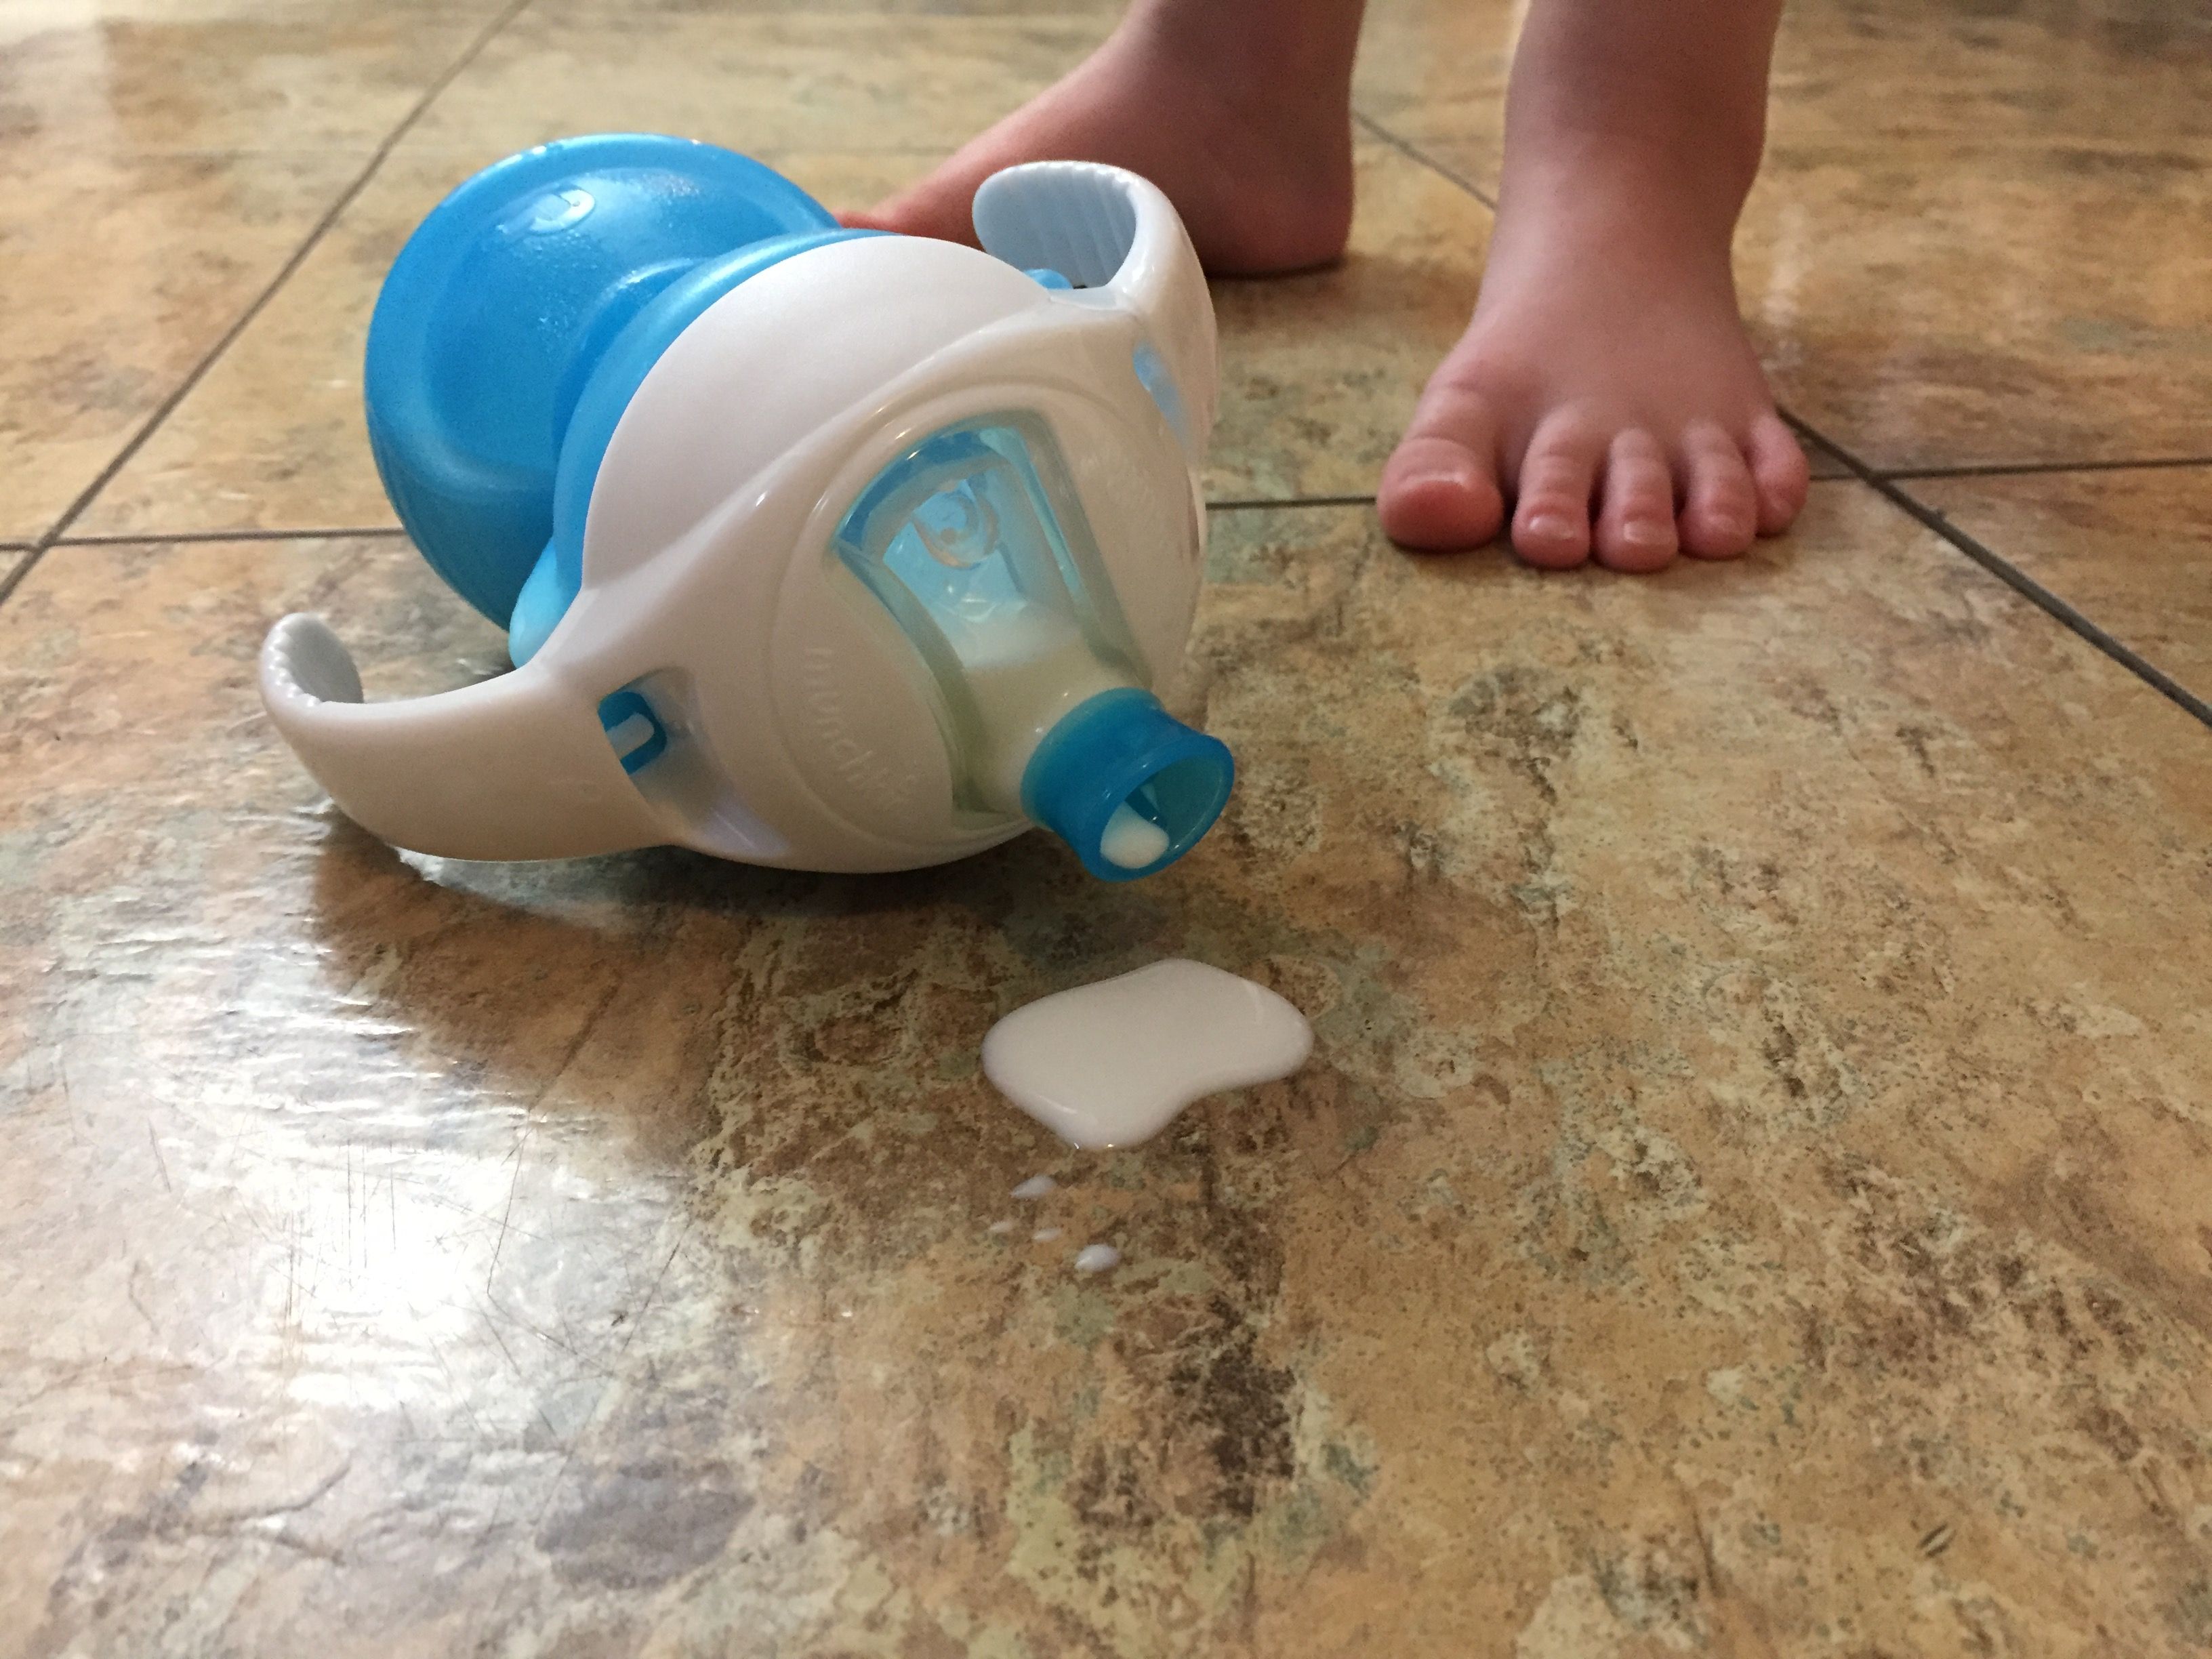 sippy cup on floor dripping milk